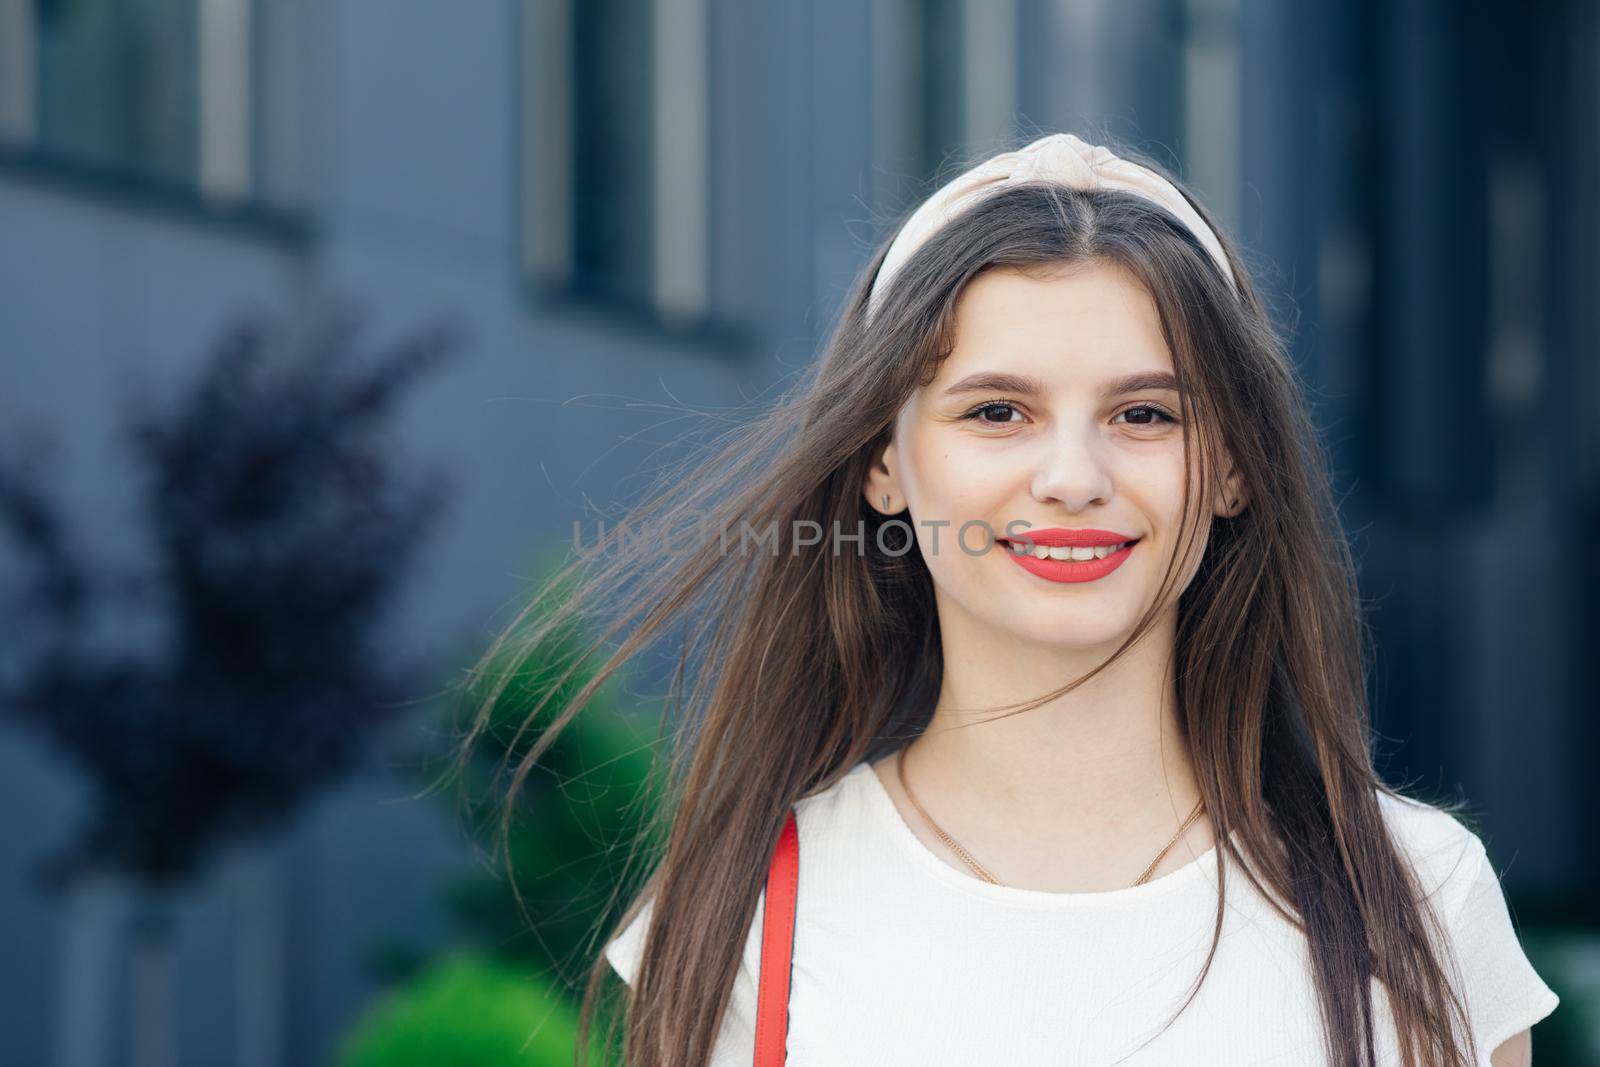 Stylish pretty woman outdoor. Young smiling woman having fun in city. Red lipstick. Portrait of sexy smiling caucasian young woman model with glamour red lips,bright makeup